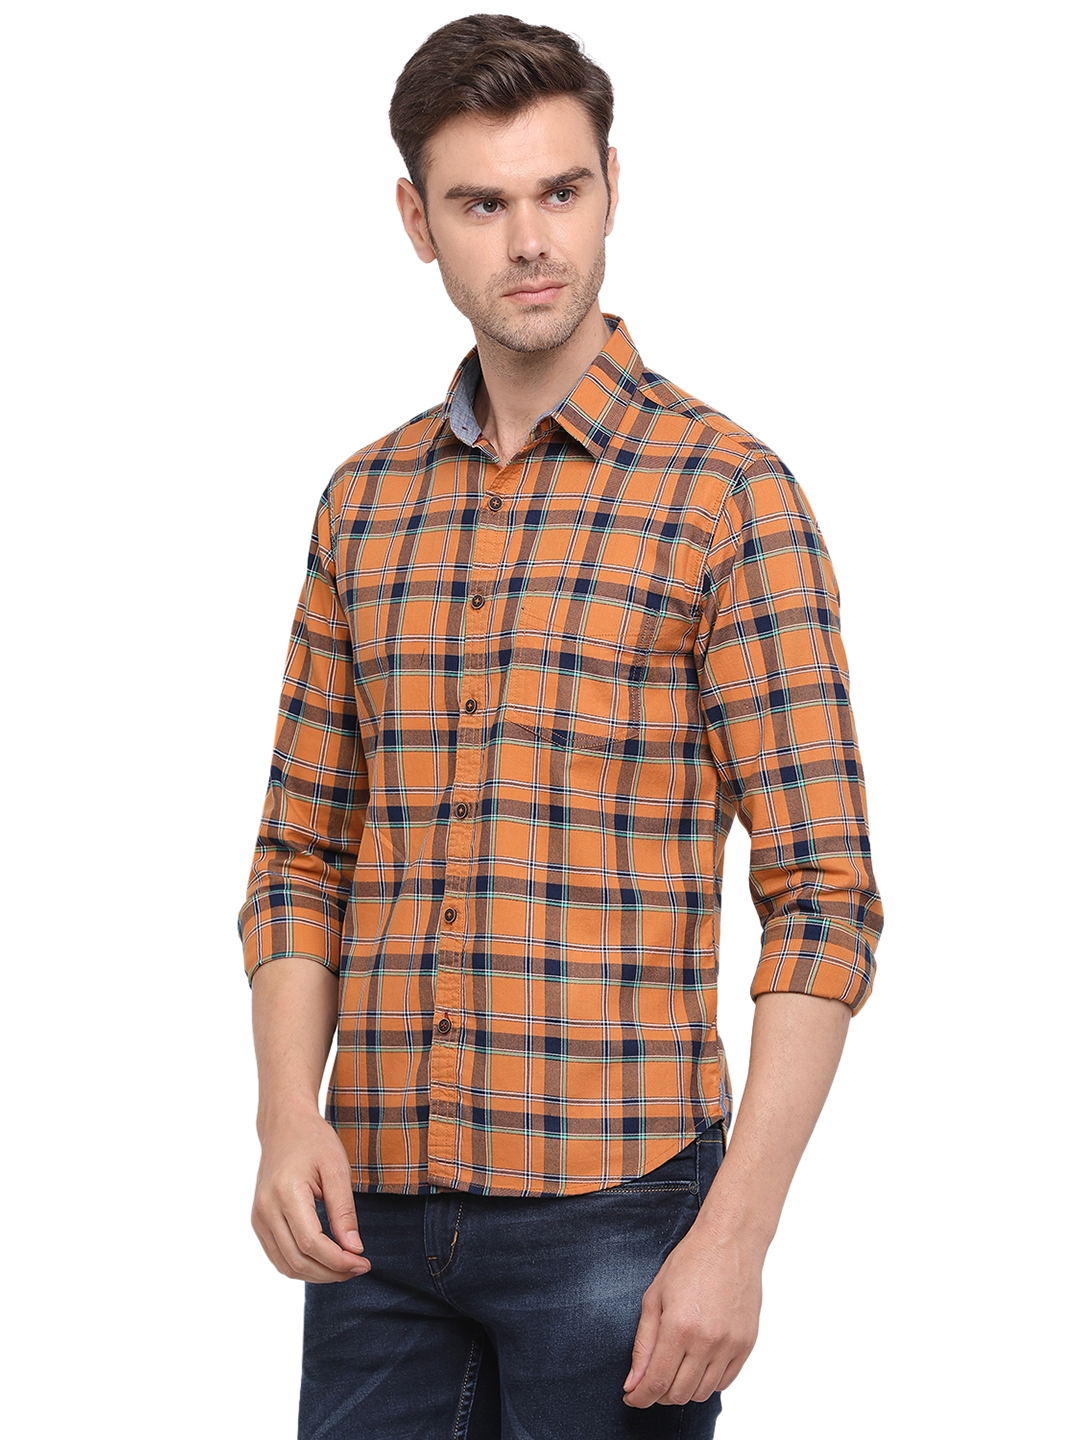 Greenfibre | Goldenrod Orange Checked Slim Fit Casual Shirt | Greenfibre